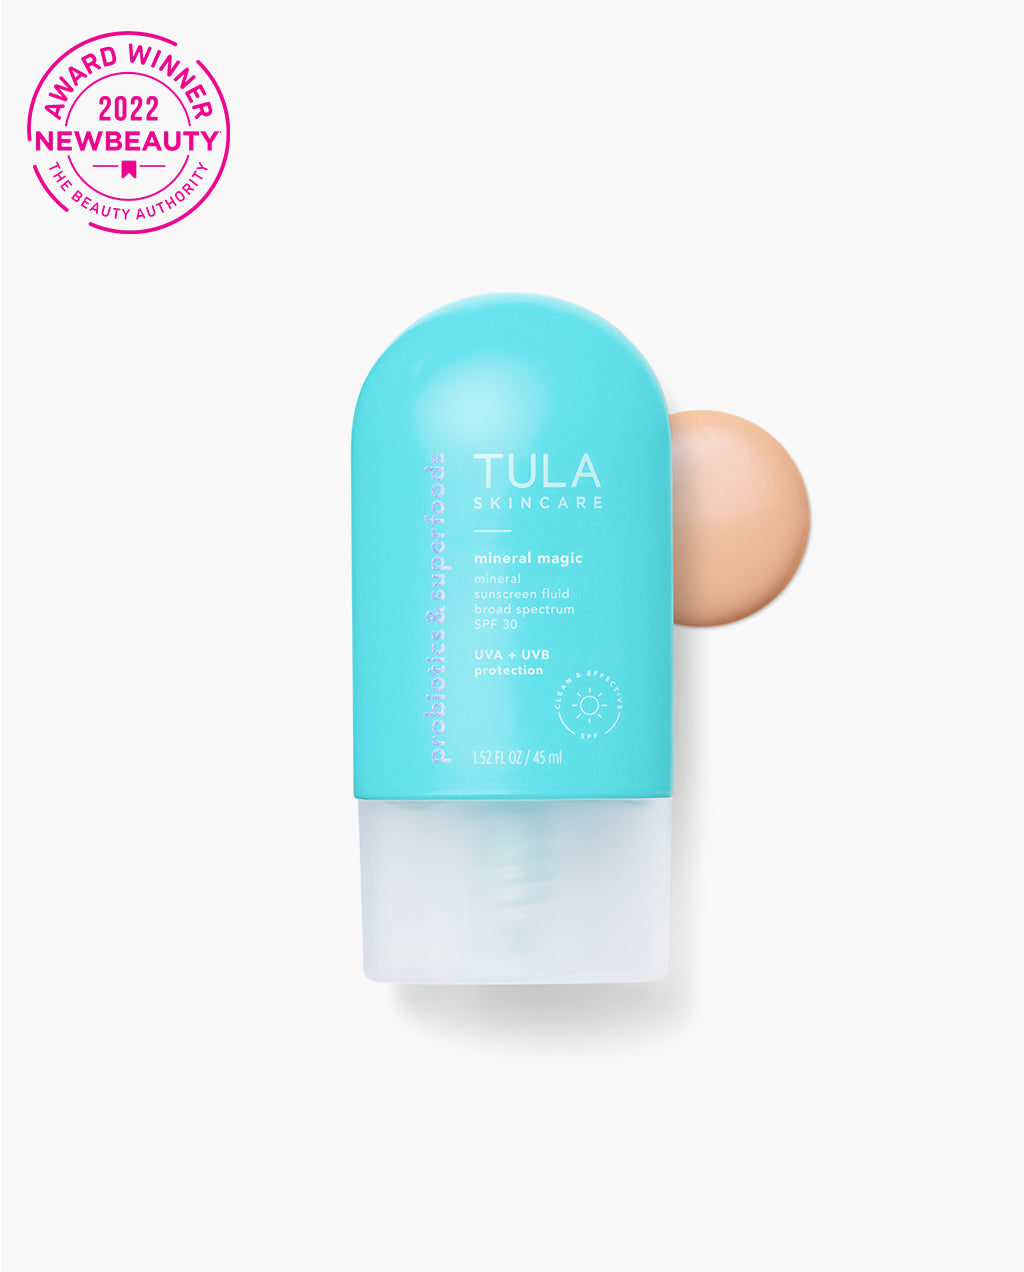 Tula Mineral Oil Free Sunscreen Review 2022